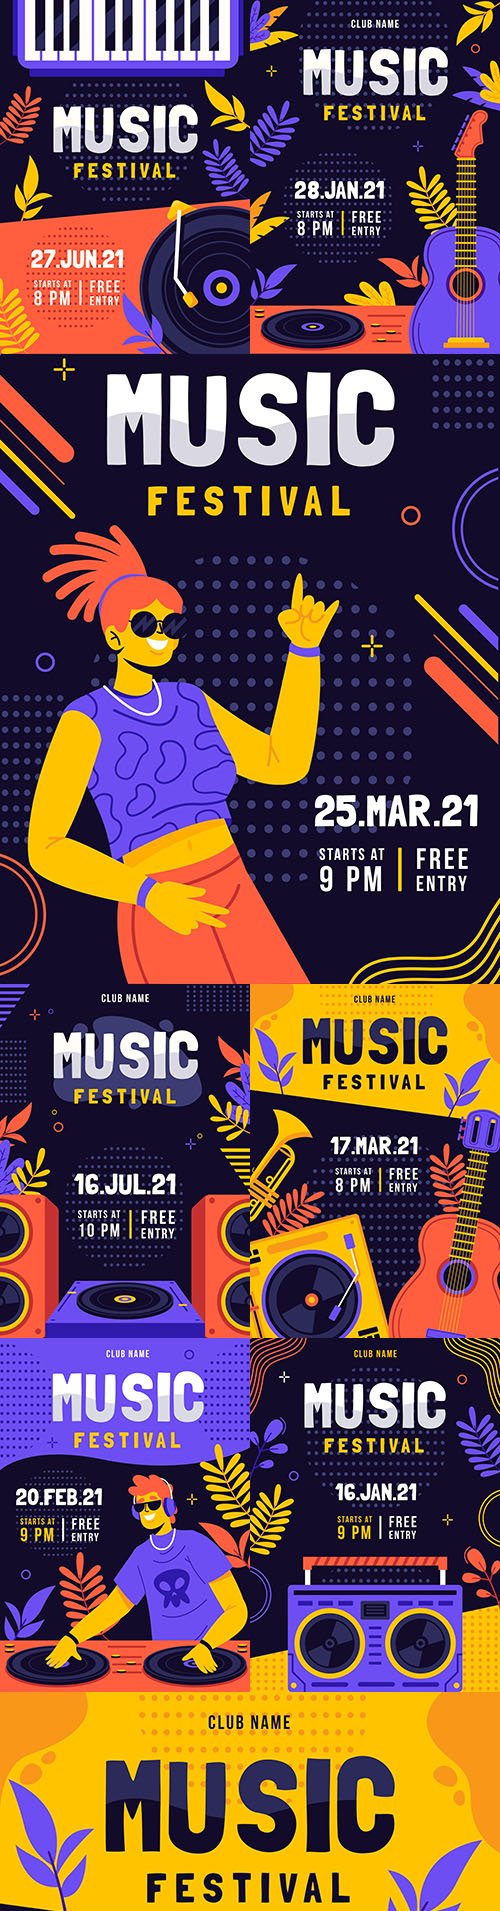 Music festival illustrated bright poster template